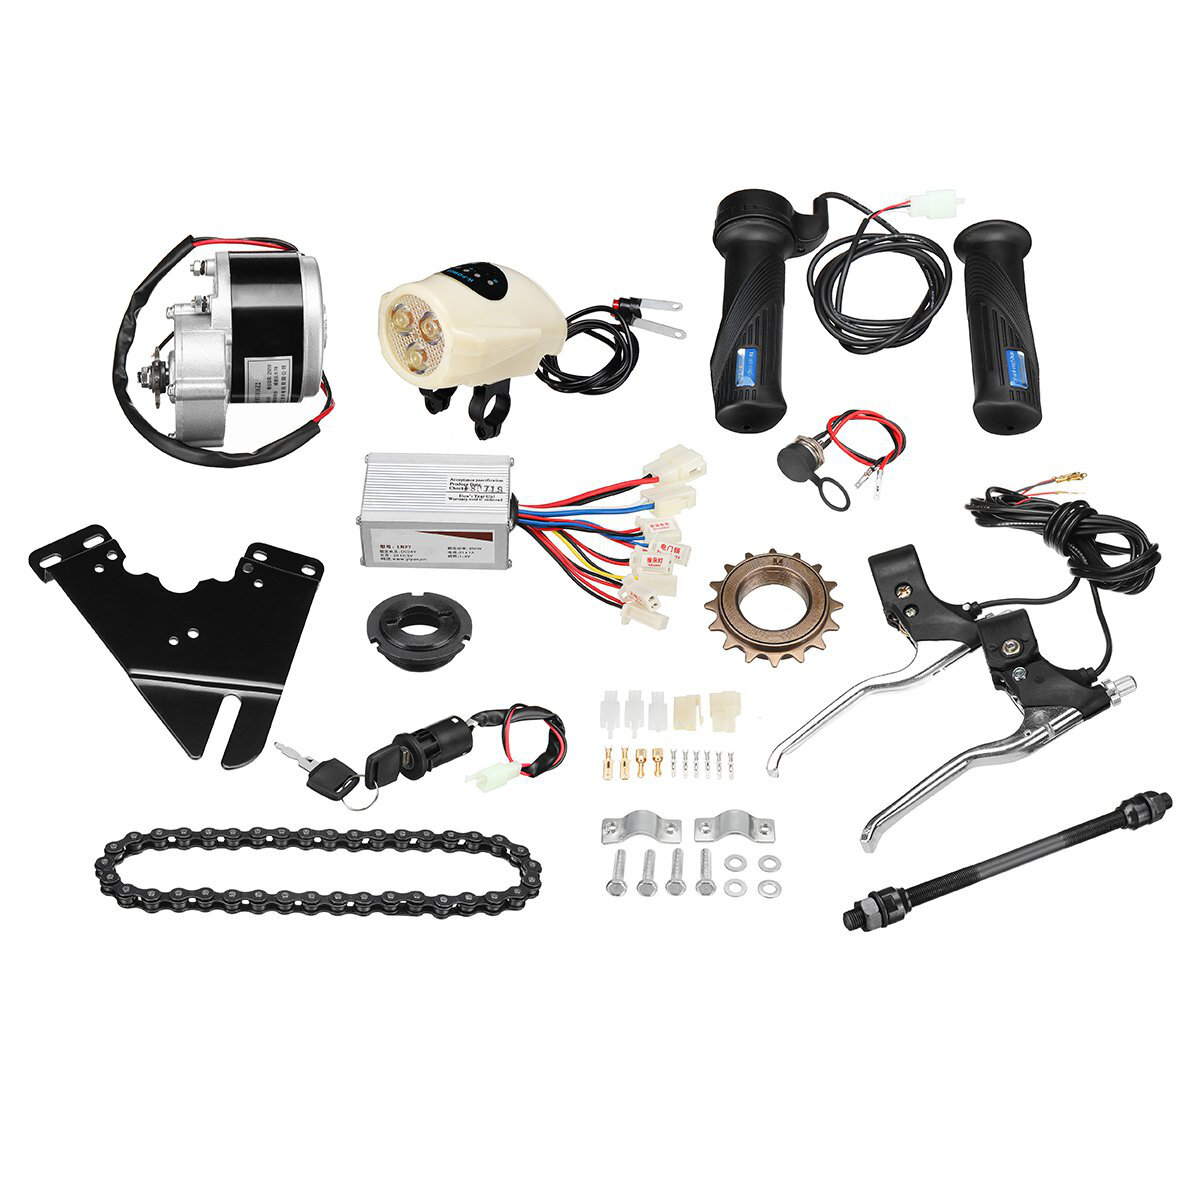 Image of Electric Bike Conversion Kit Bicycle Conversion Kit Lithium Battery Modified for Folding Vehicles for Electric Scooters